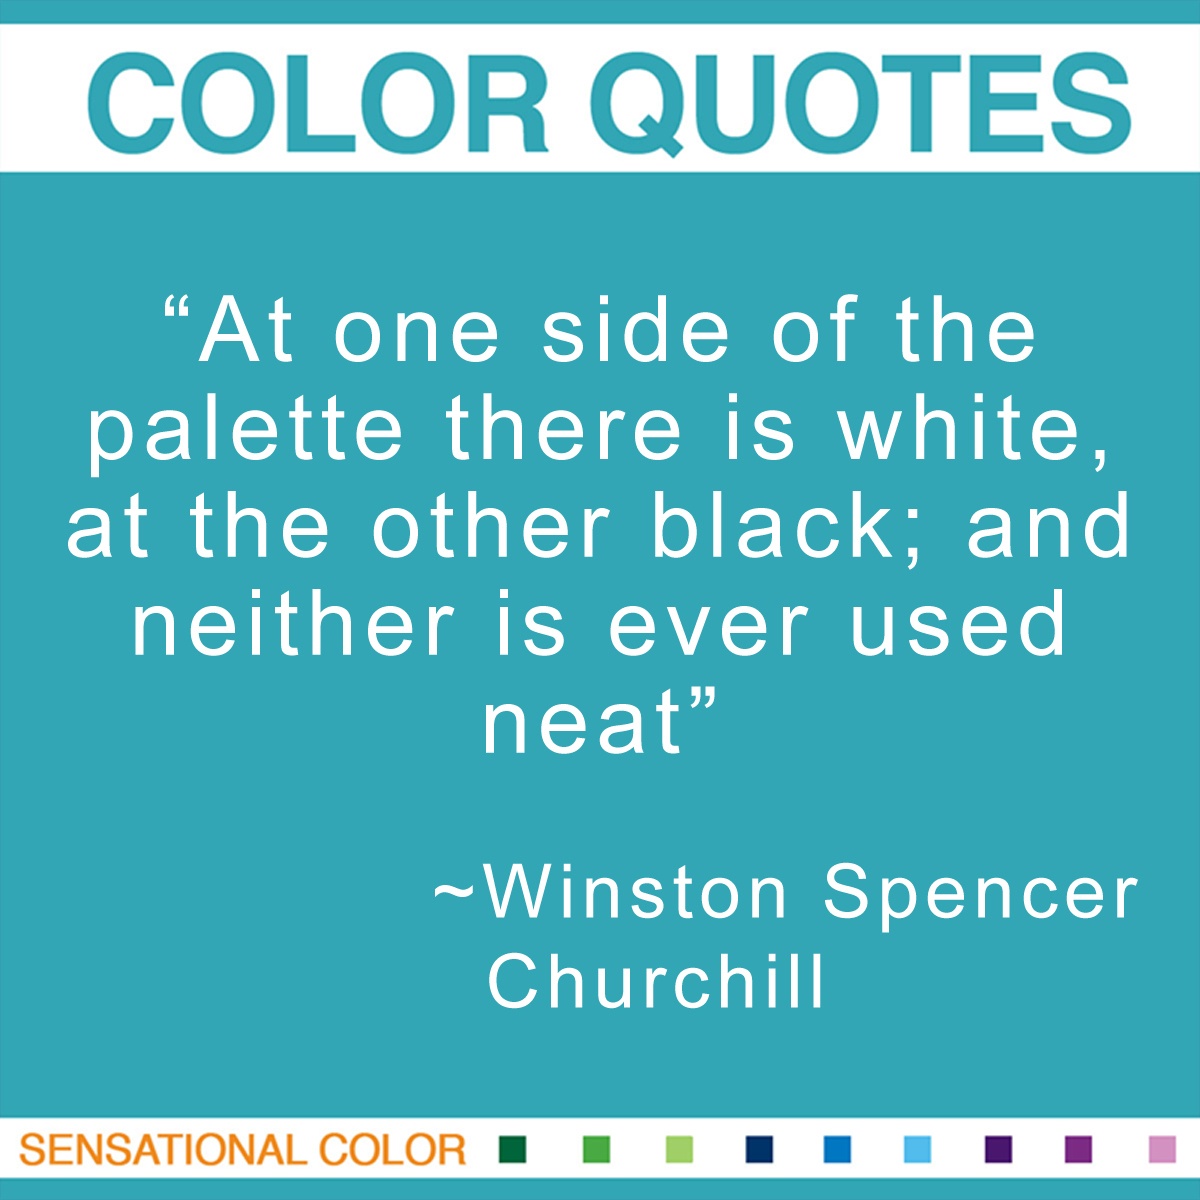 “At one side of the palette there is white, at the other black; and neither is ever used neat.” - Winston Spencer Churchill